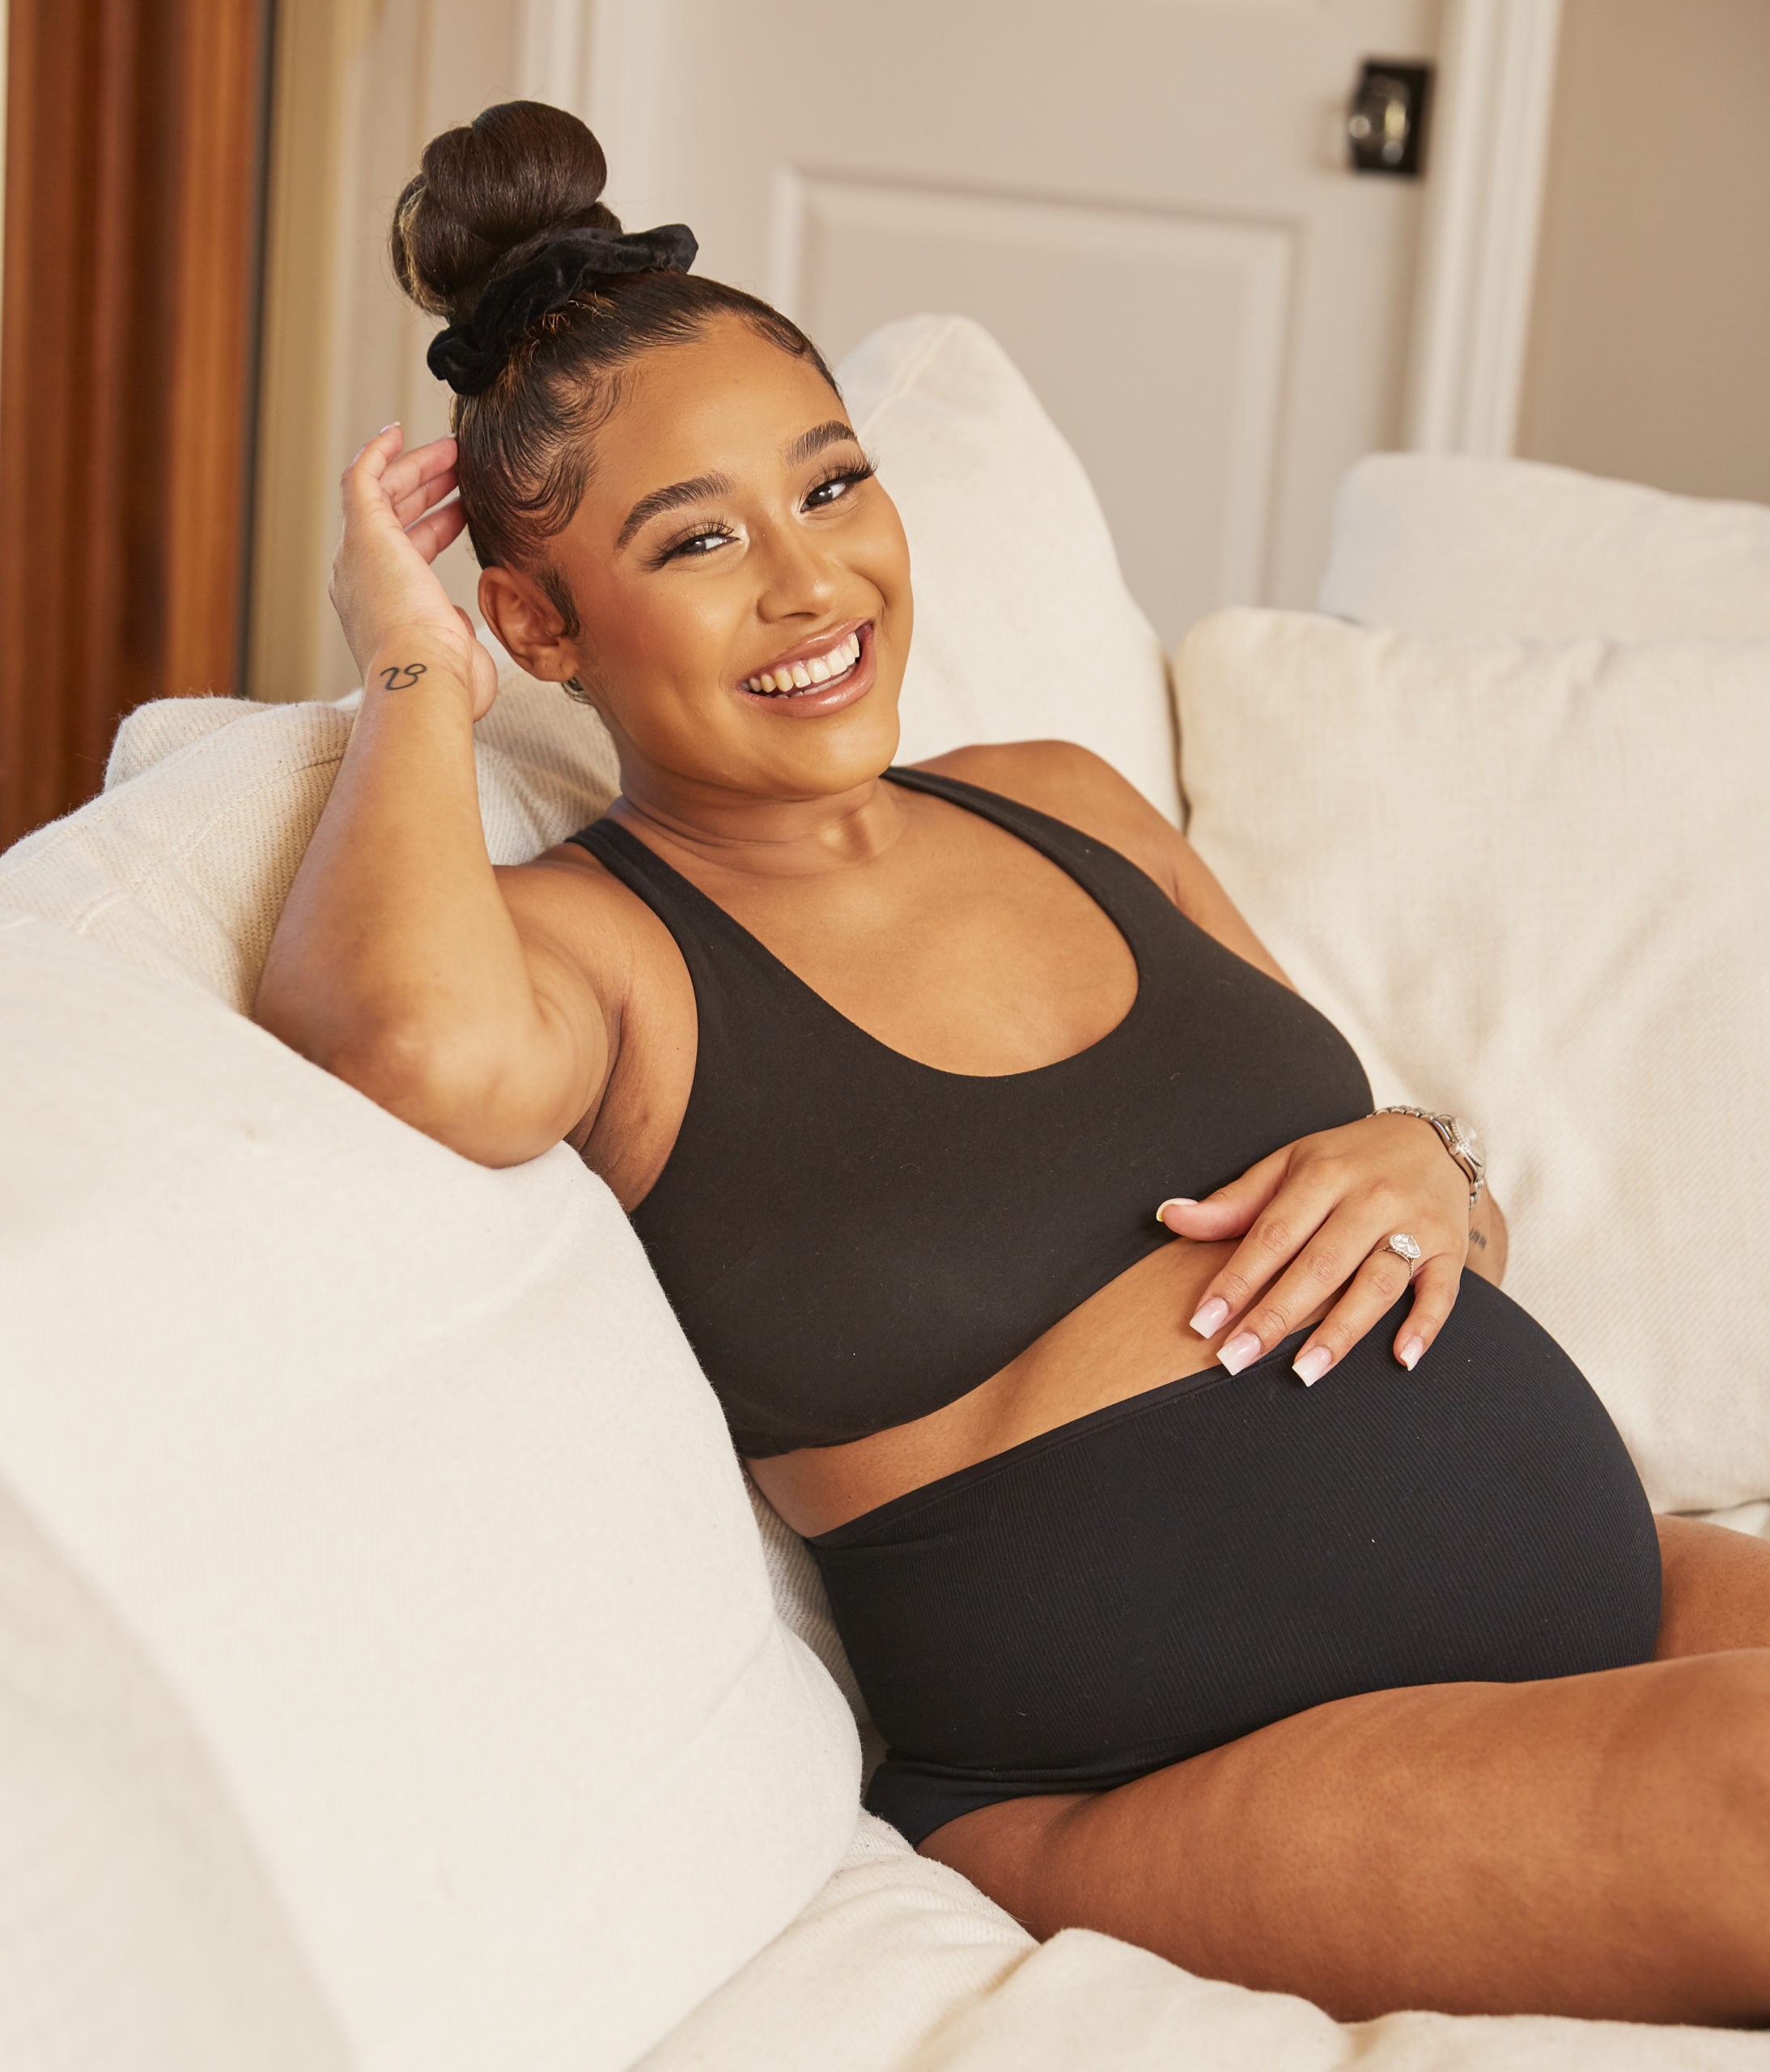 Soon-To-Be Wife of Warrior Kelly Oubre Jr., Shylyn Gibson